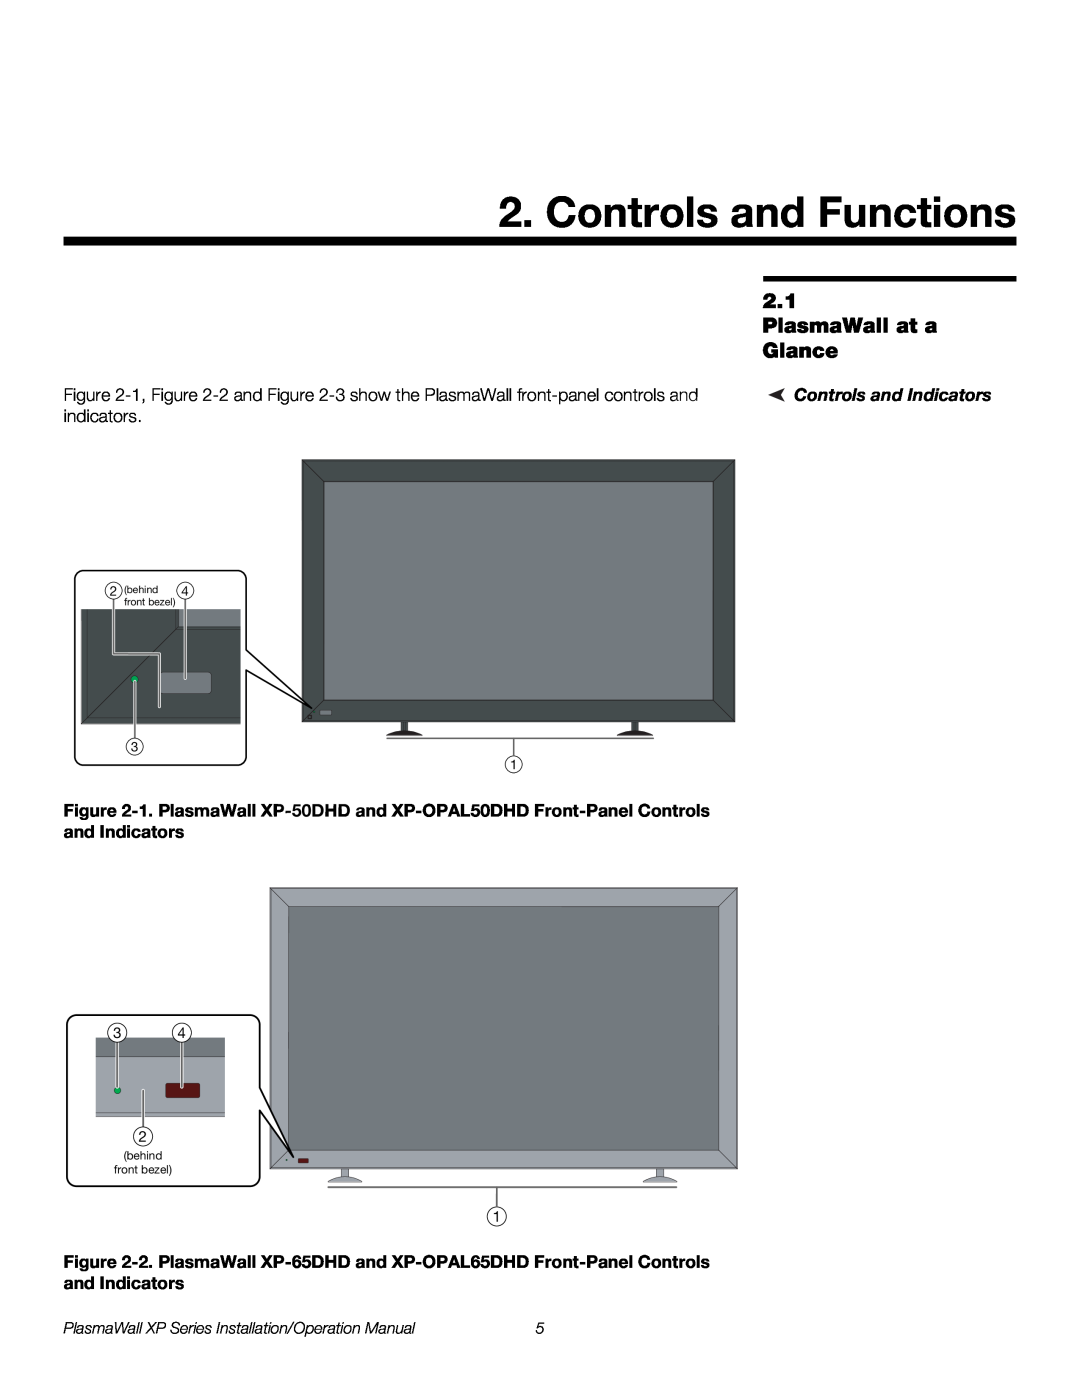 Runco XP-103DHD, XP-50DHD, XP-OPAL65DHD Controls and Functions, PlasmaWall at a Glance, Controls and Indicators 